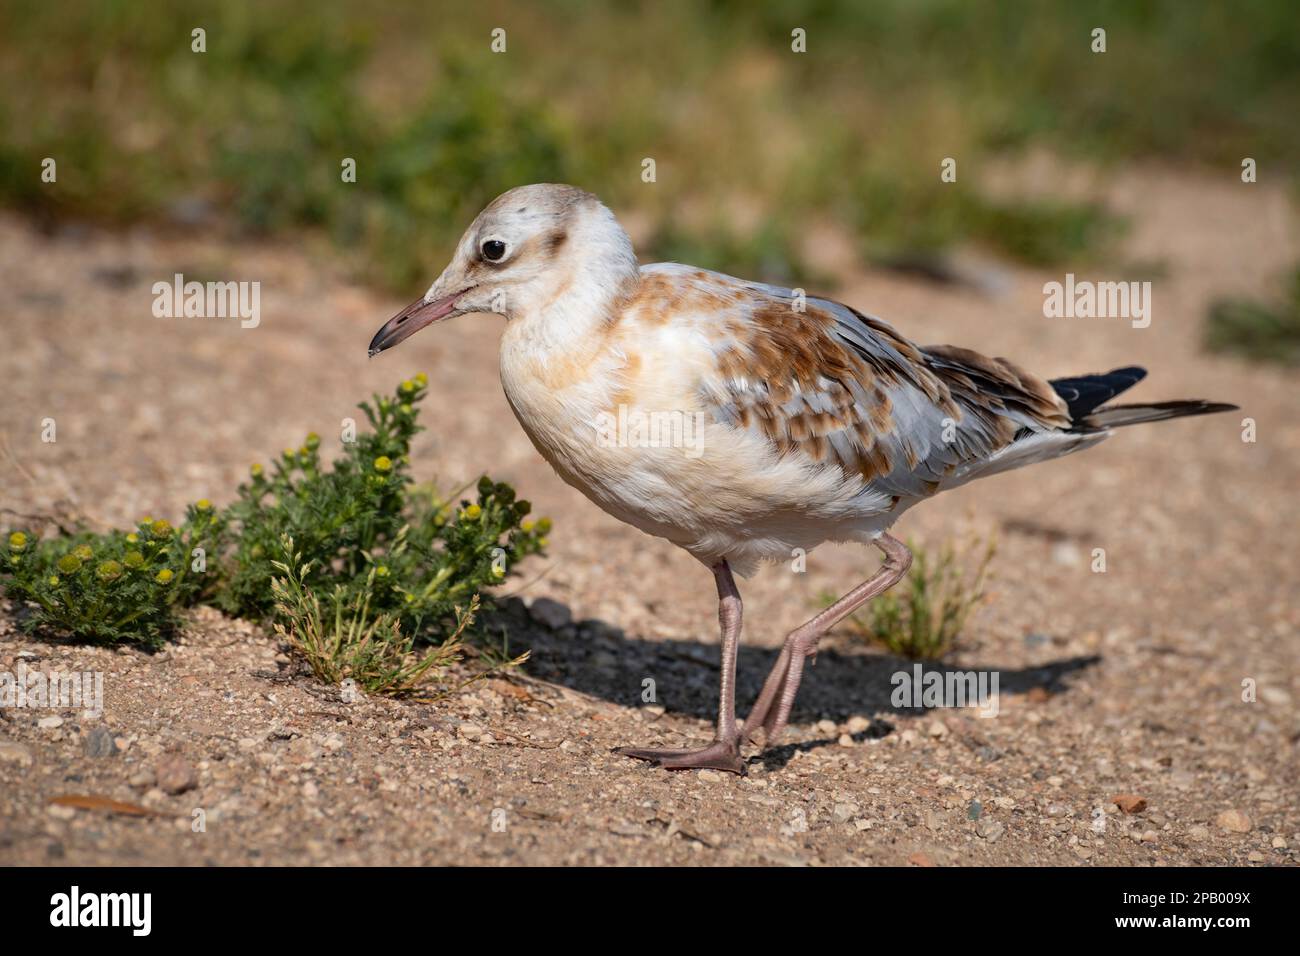 A black-headed gull chick is walking on the sand, Ostrov, Pskov region, Russia Stock Photo